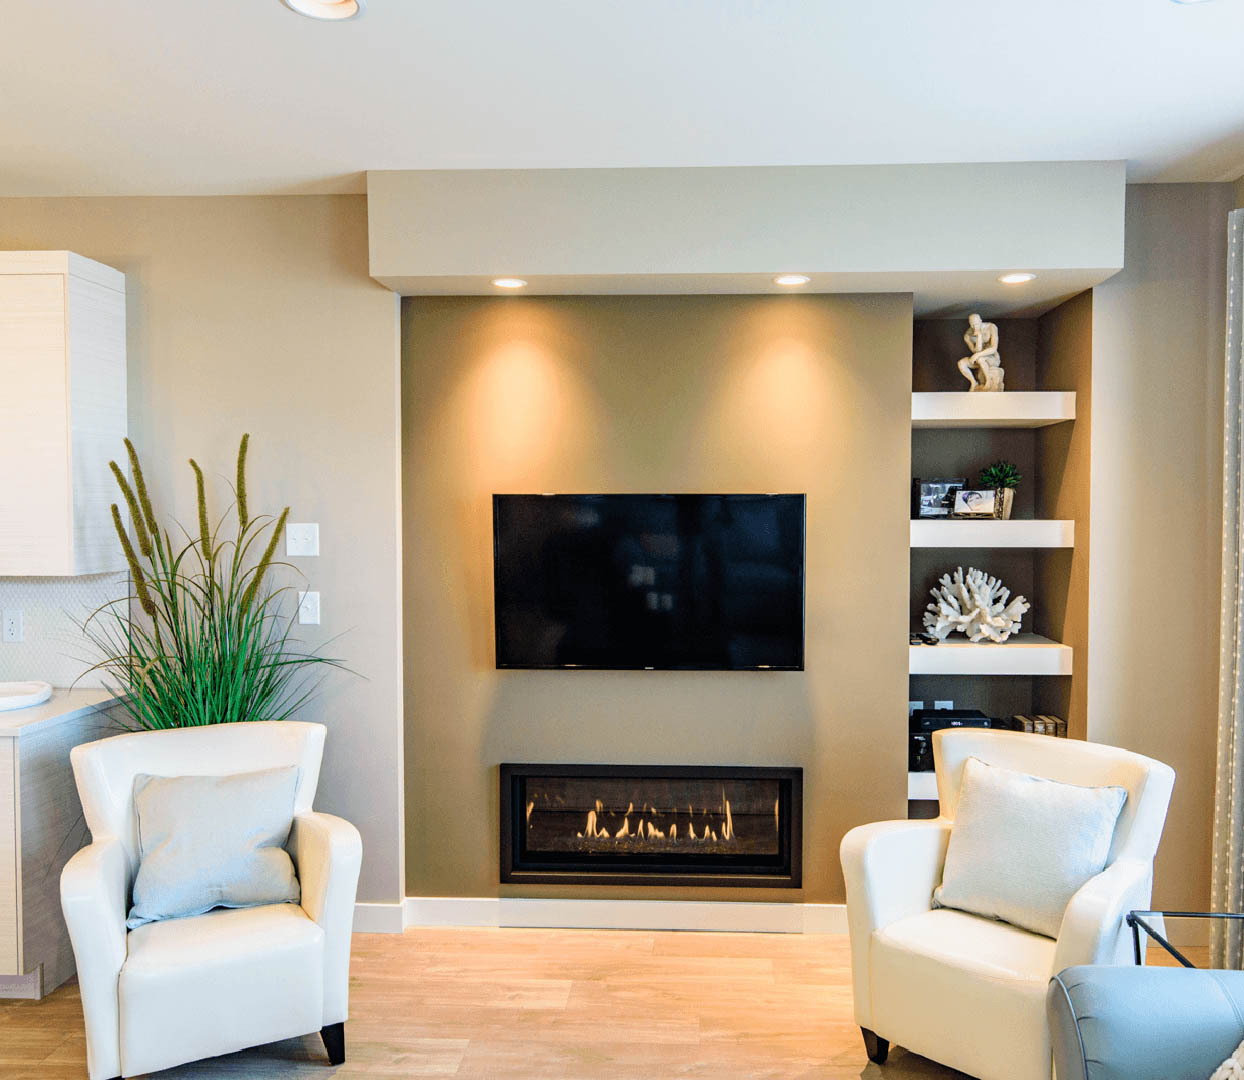 6 Home Features Every First Time Home Buyer Should Have Fireplace Image